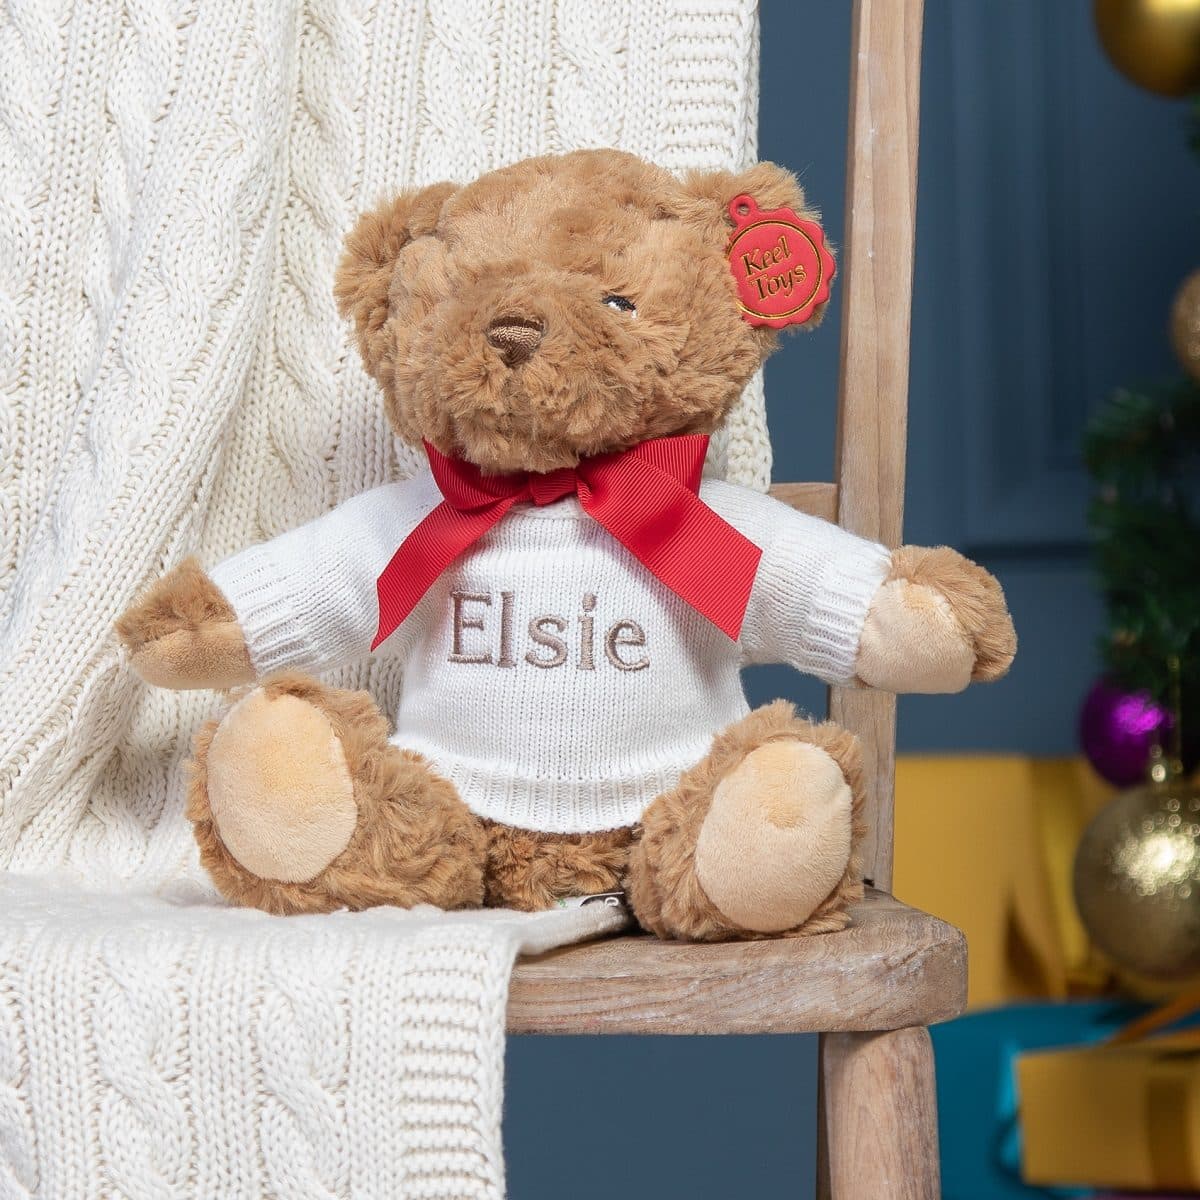 Personalised keeleco recycled medium teddy bear soft toy Baby Shower Gifts 2